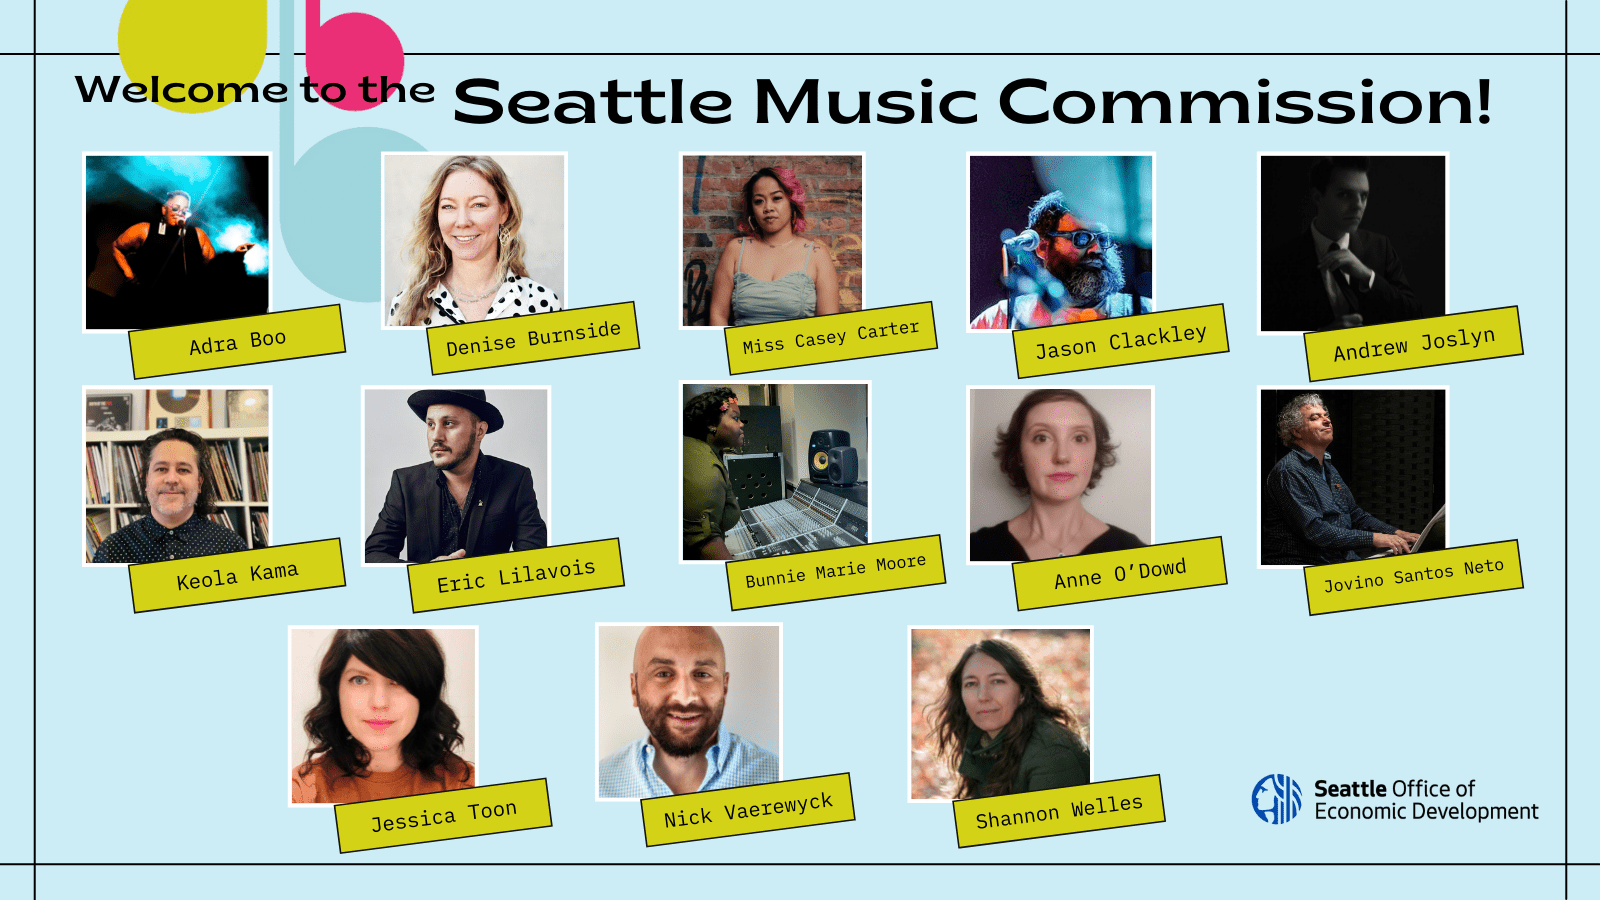 Blue graphic with music symbols in colors green, pink and blue as well as photos and names of new Seattle Music Commissioners. Text says: Welcome to the Seattle Music Commission!